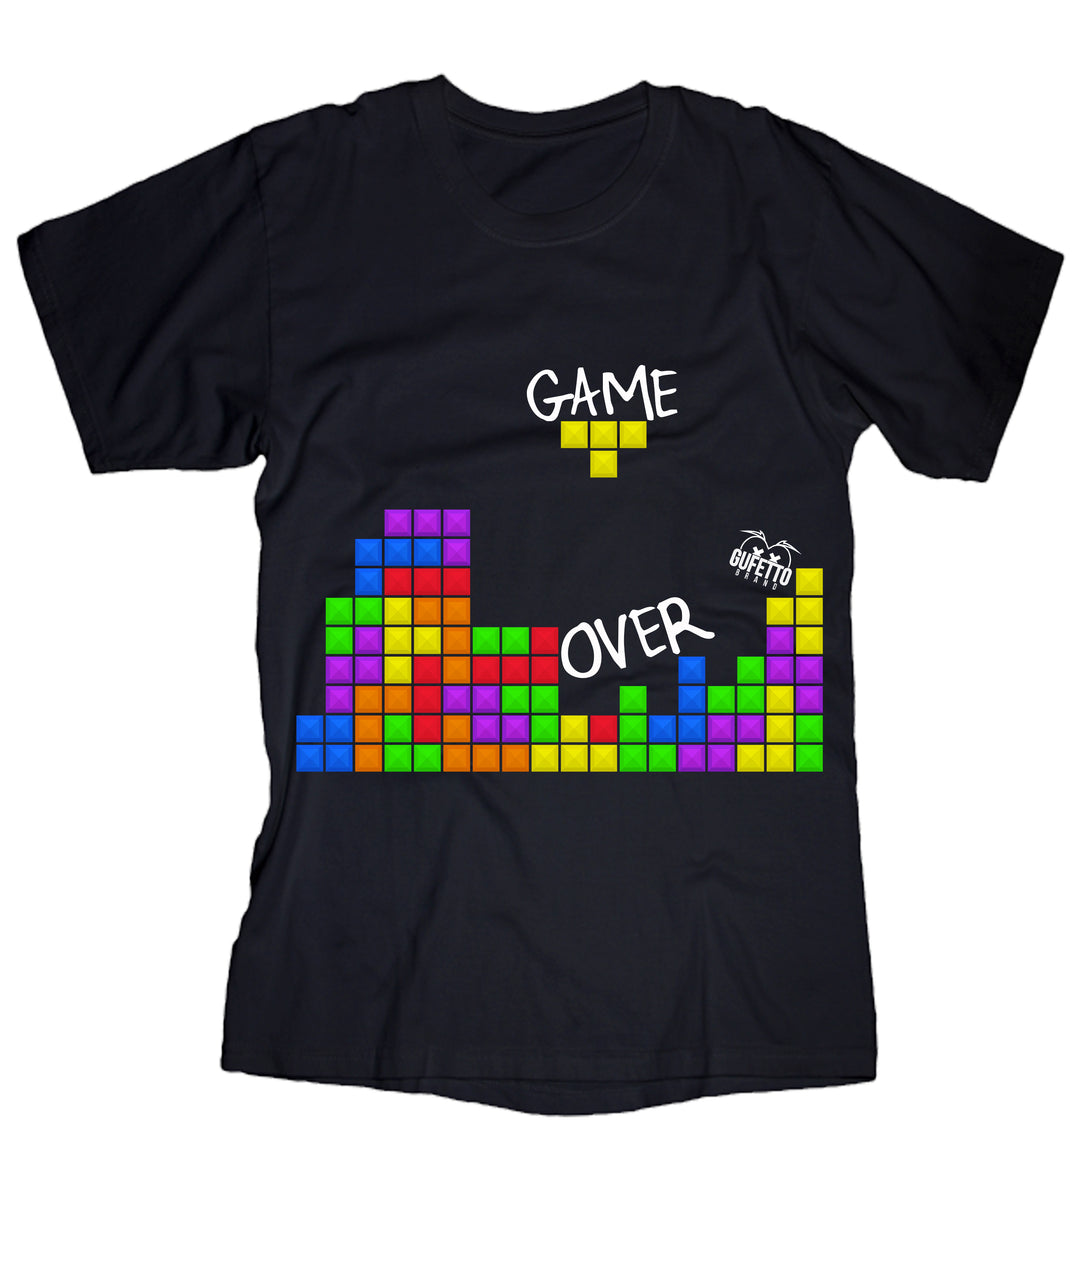 T-shirt Donna  GAME OVER ( A476 ) - Gufetto Brand 